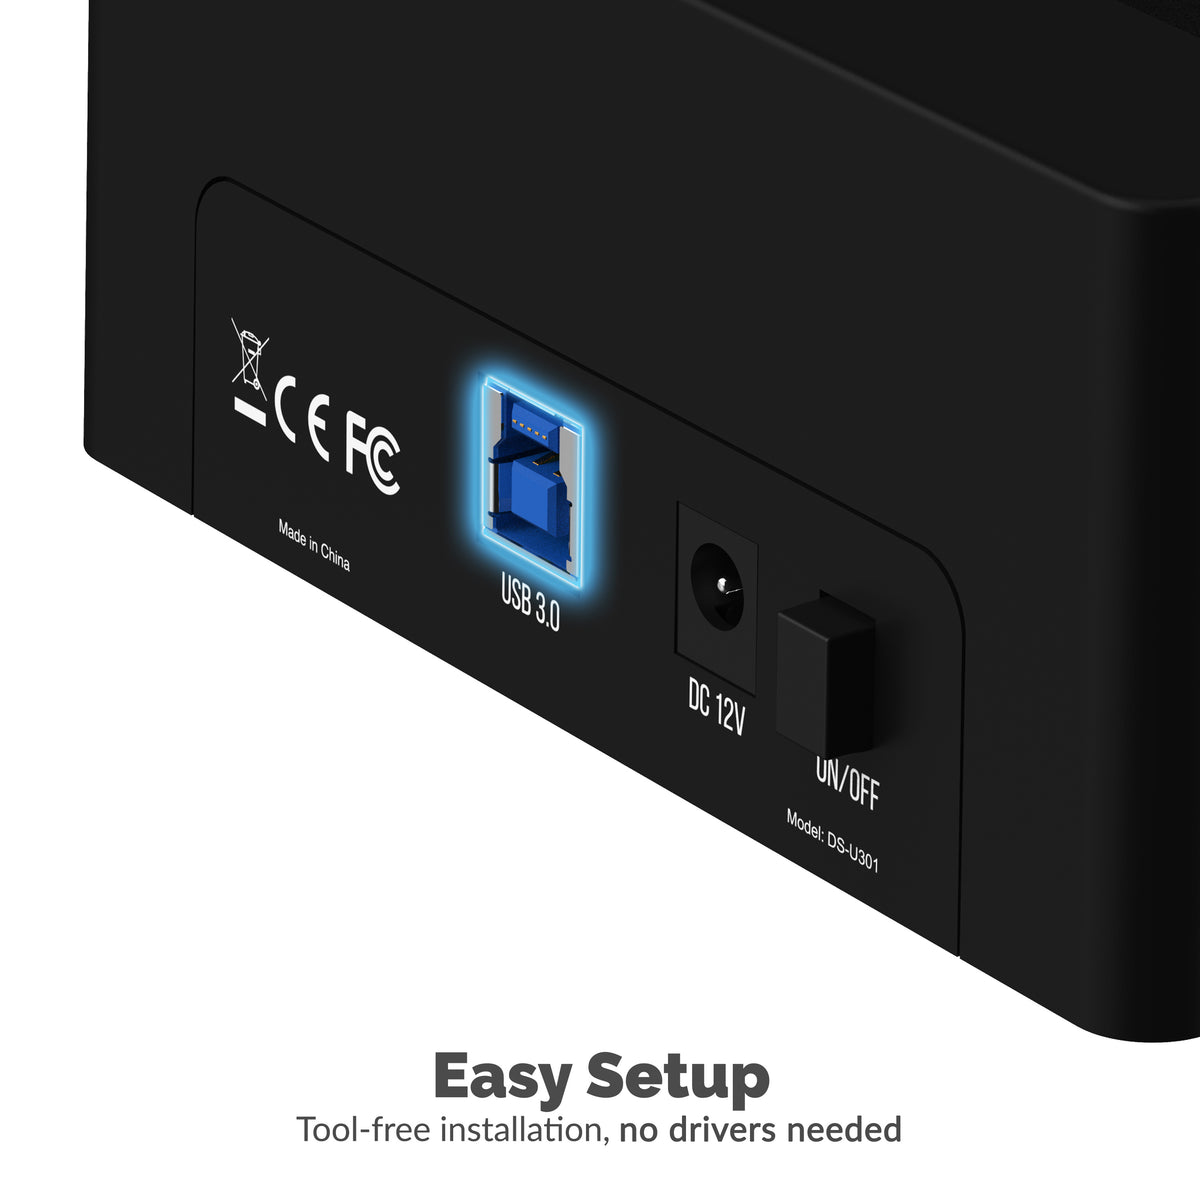 USB 3.0 SATA/SSD 2.5&quot; HDD Docking Station with 3 USB Ports